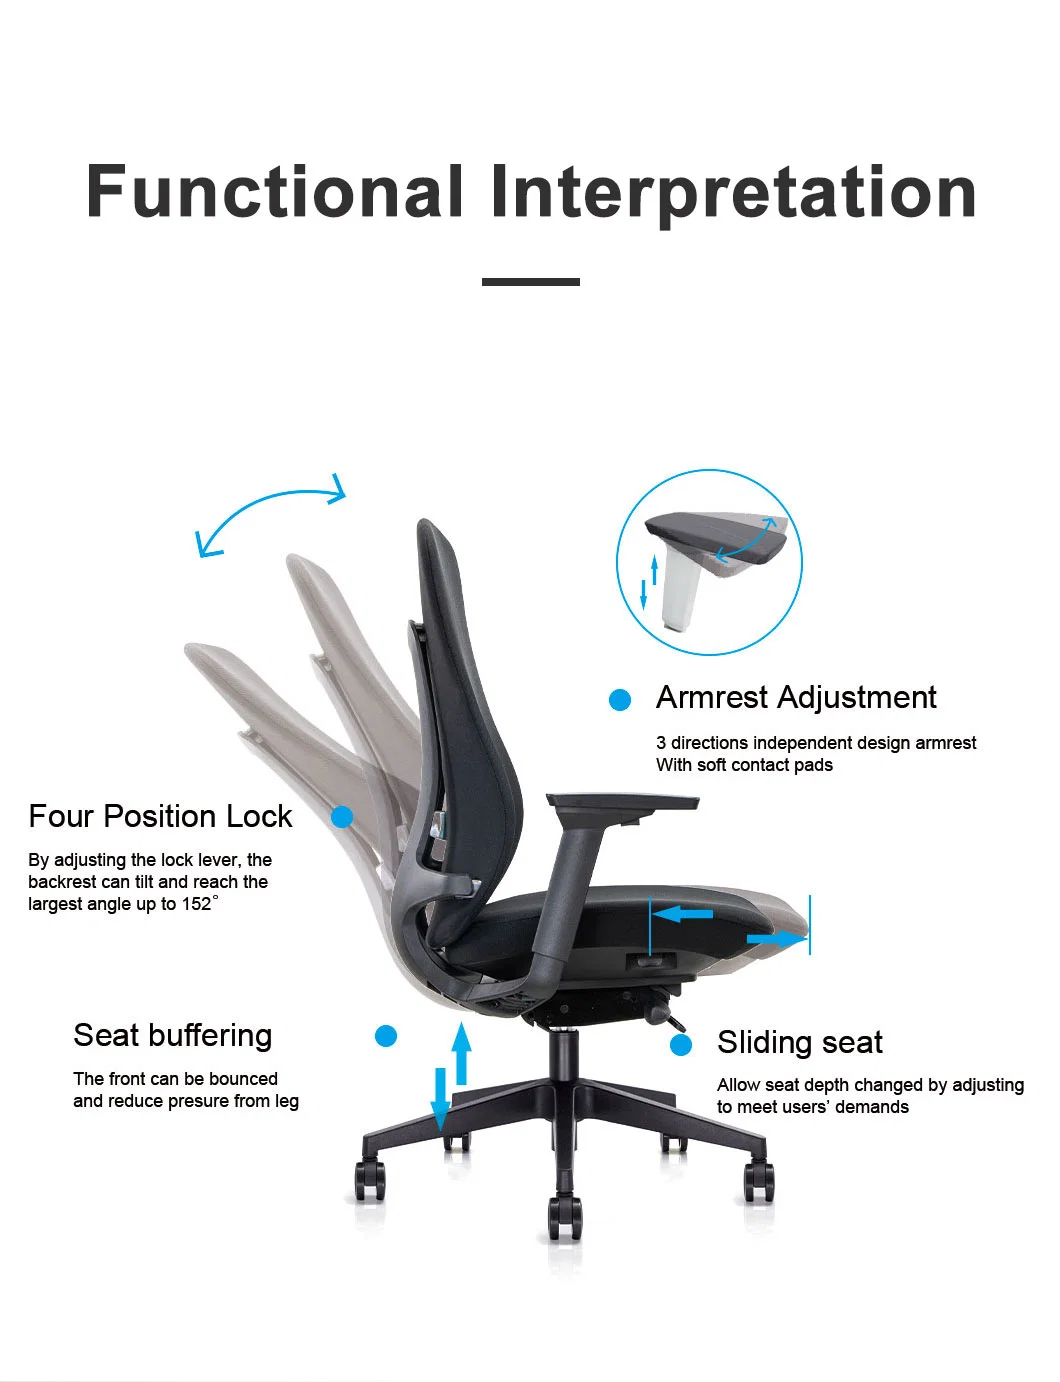 Best Price Computer Gaming Ergonomic MID Back Executive Swivel Mesh Office Chair